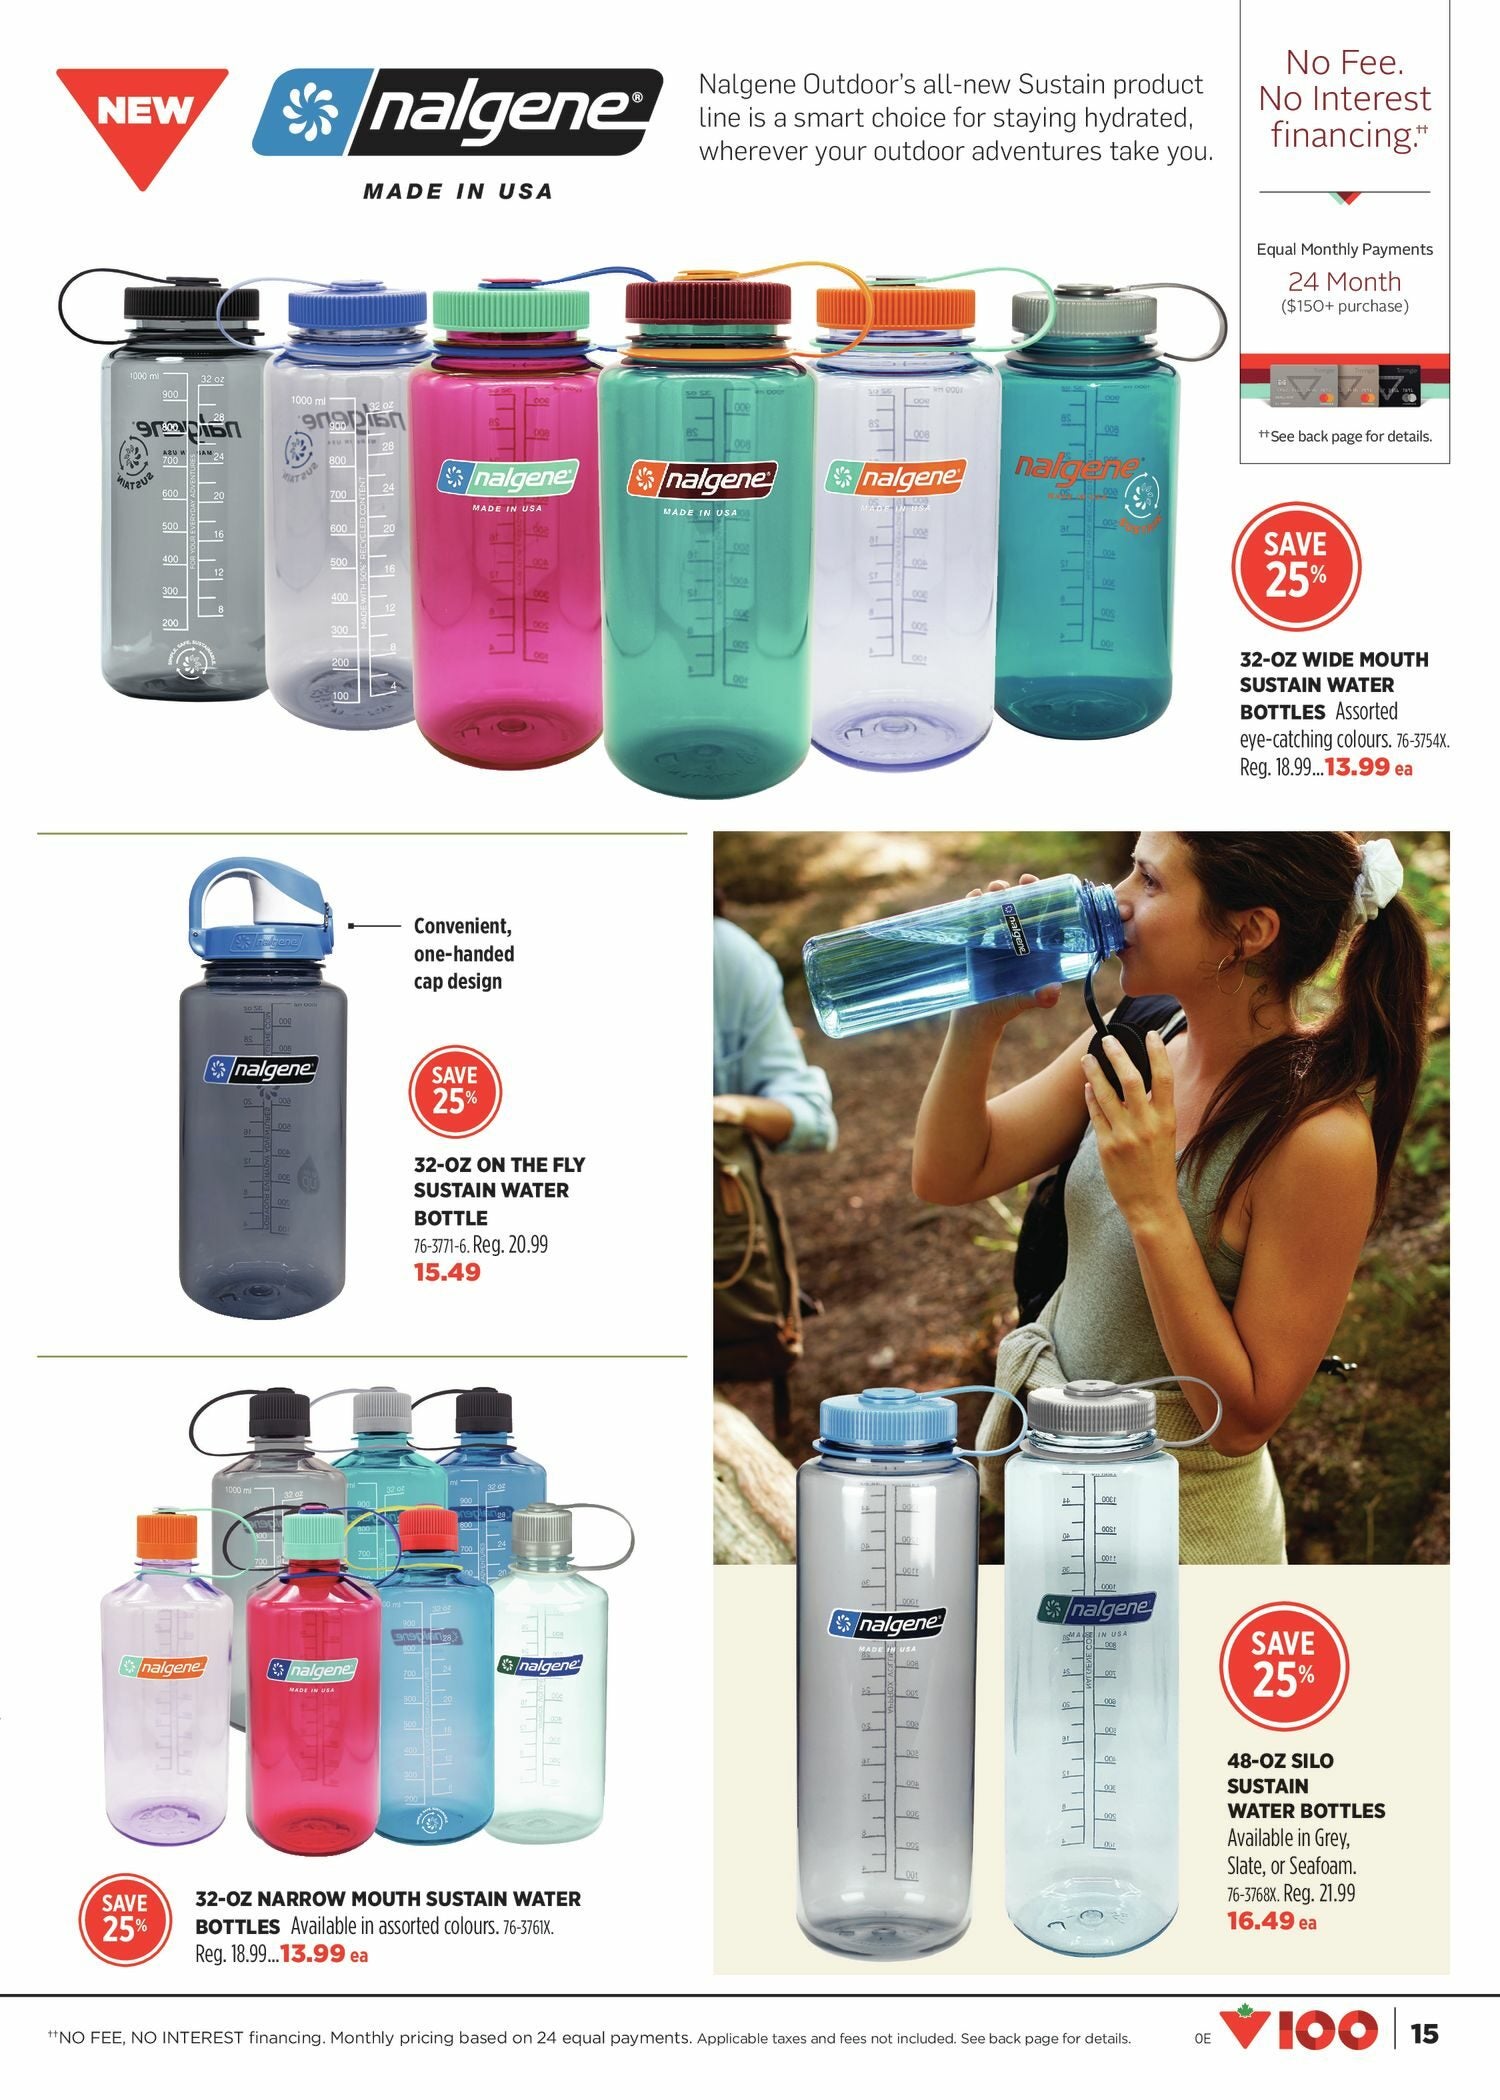 Canadian Tire Weekly Flyer - The Outsider - Spring/Summer 2022 - Apr 22 –  May 5 